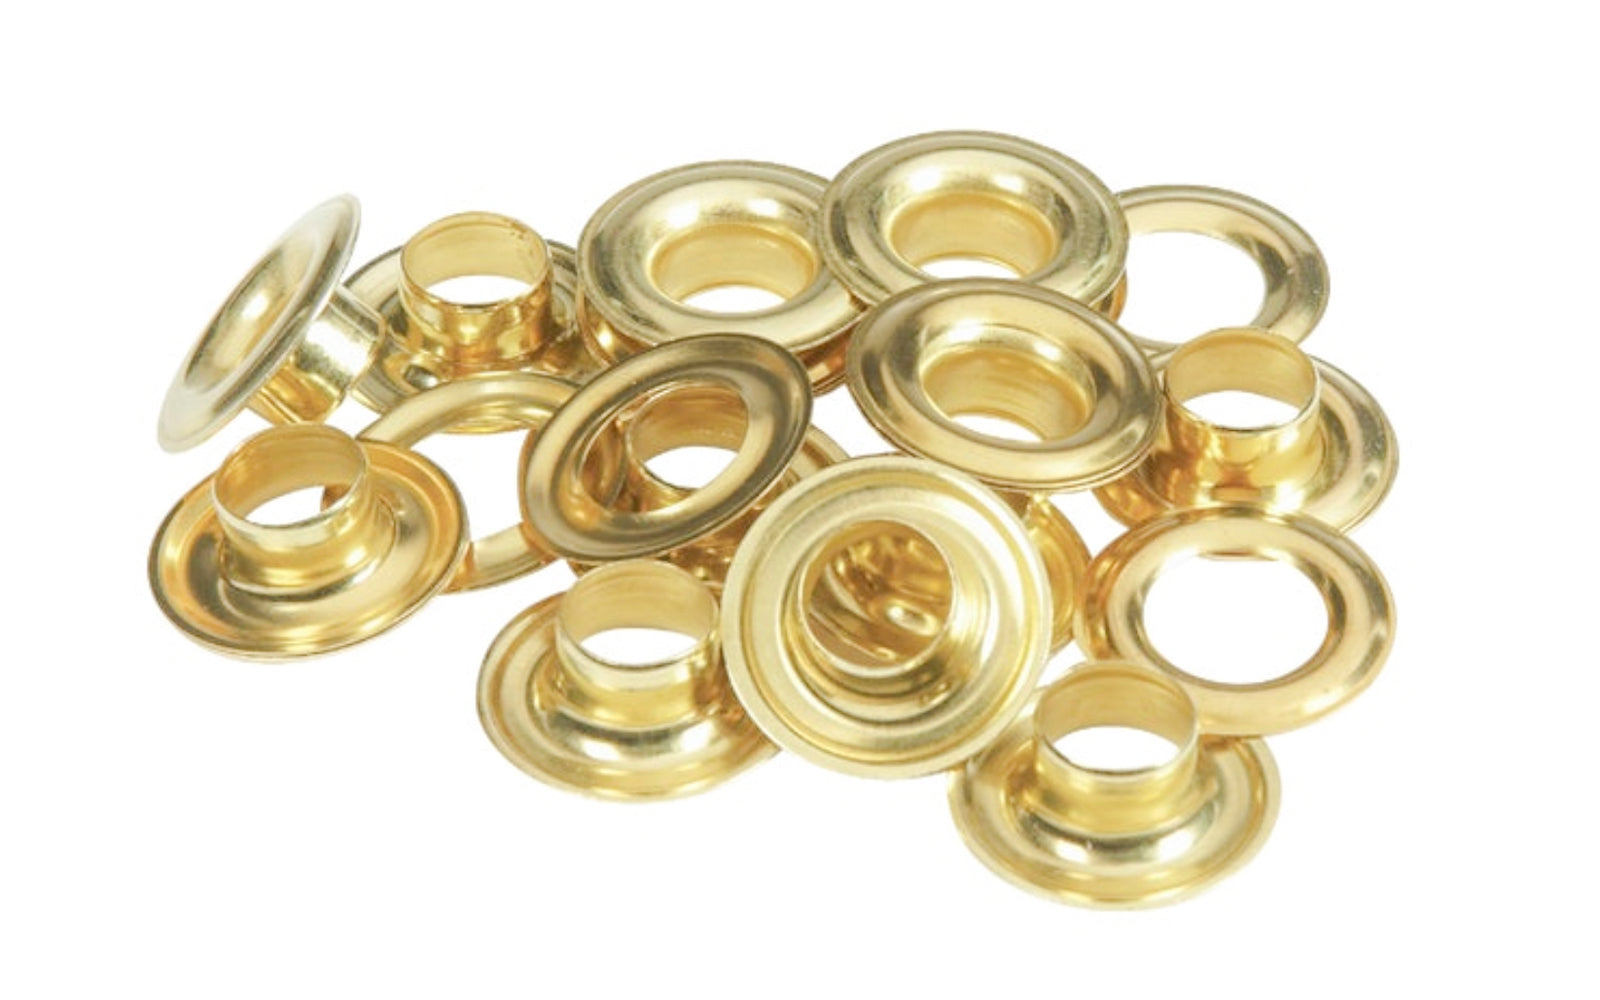 Lord & Hodge 7/16" Brass Grommets - 12 Sets. 7/16" Brass Grommet refills for replacement or repairs in canvas or plastic. Great for vinyl & canvas, tents, sails, covers for boats, trailers, pools, flags & banners, etc. 7/16" inside diameter grommets.Made by Lord and Hodge, Inc. Model 1074-3. Made in USA.